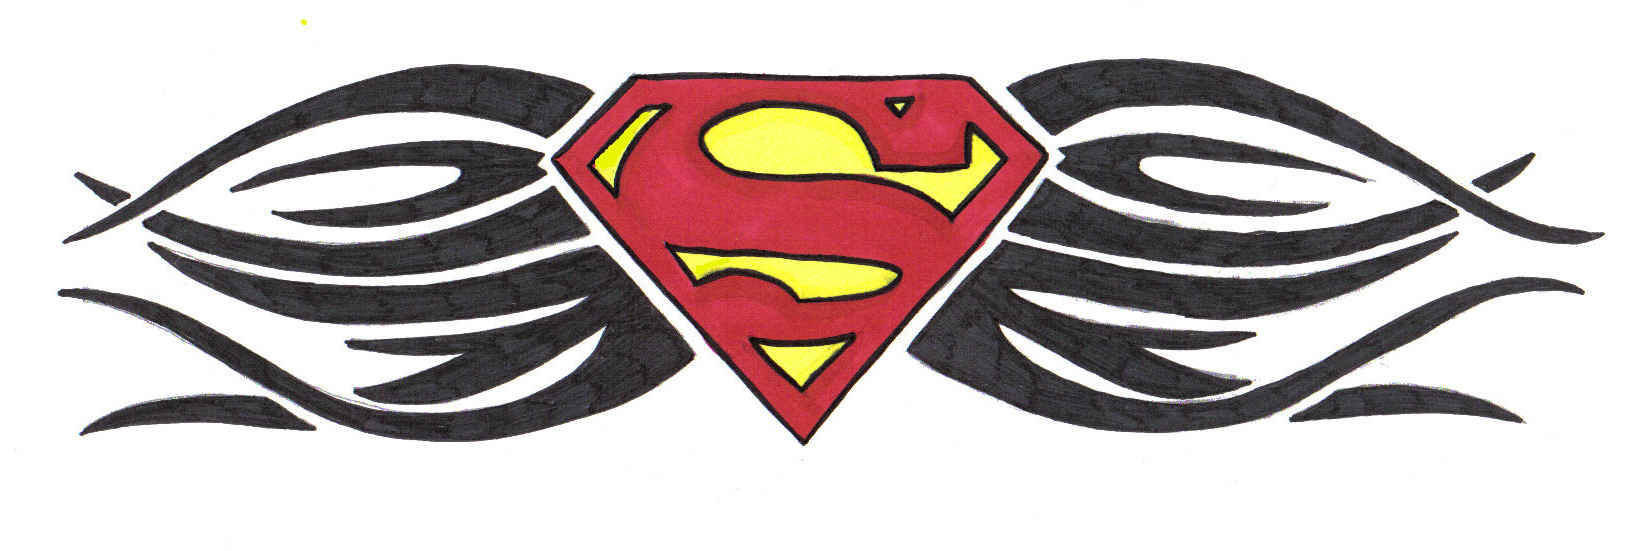 Superman Tribal Design 2 by